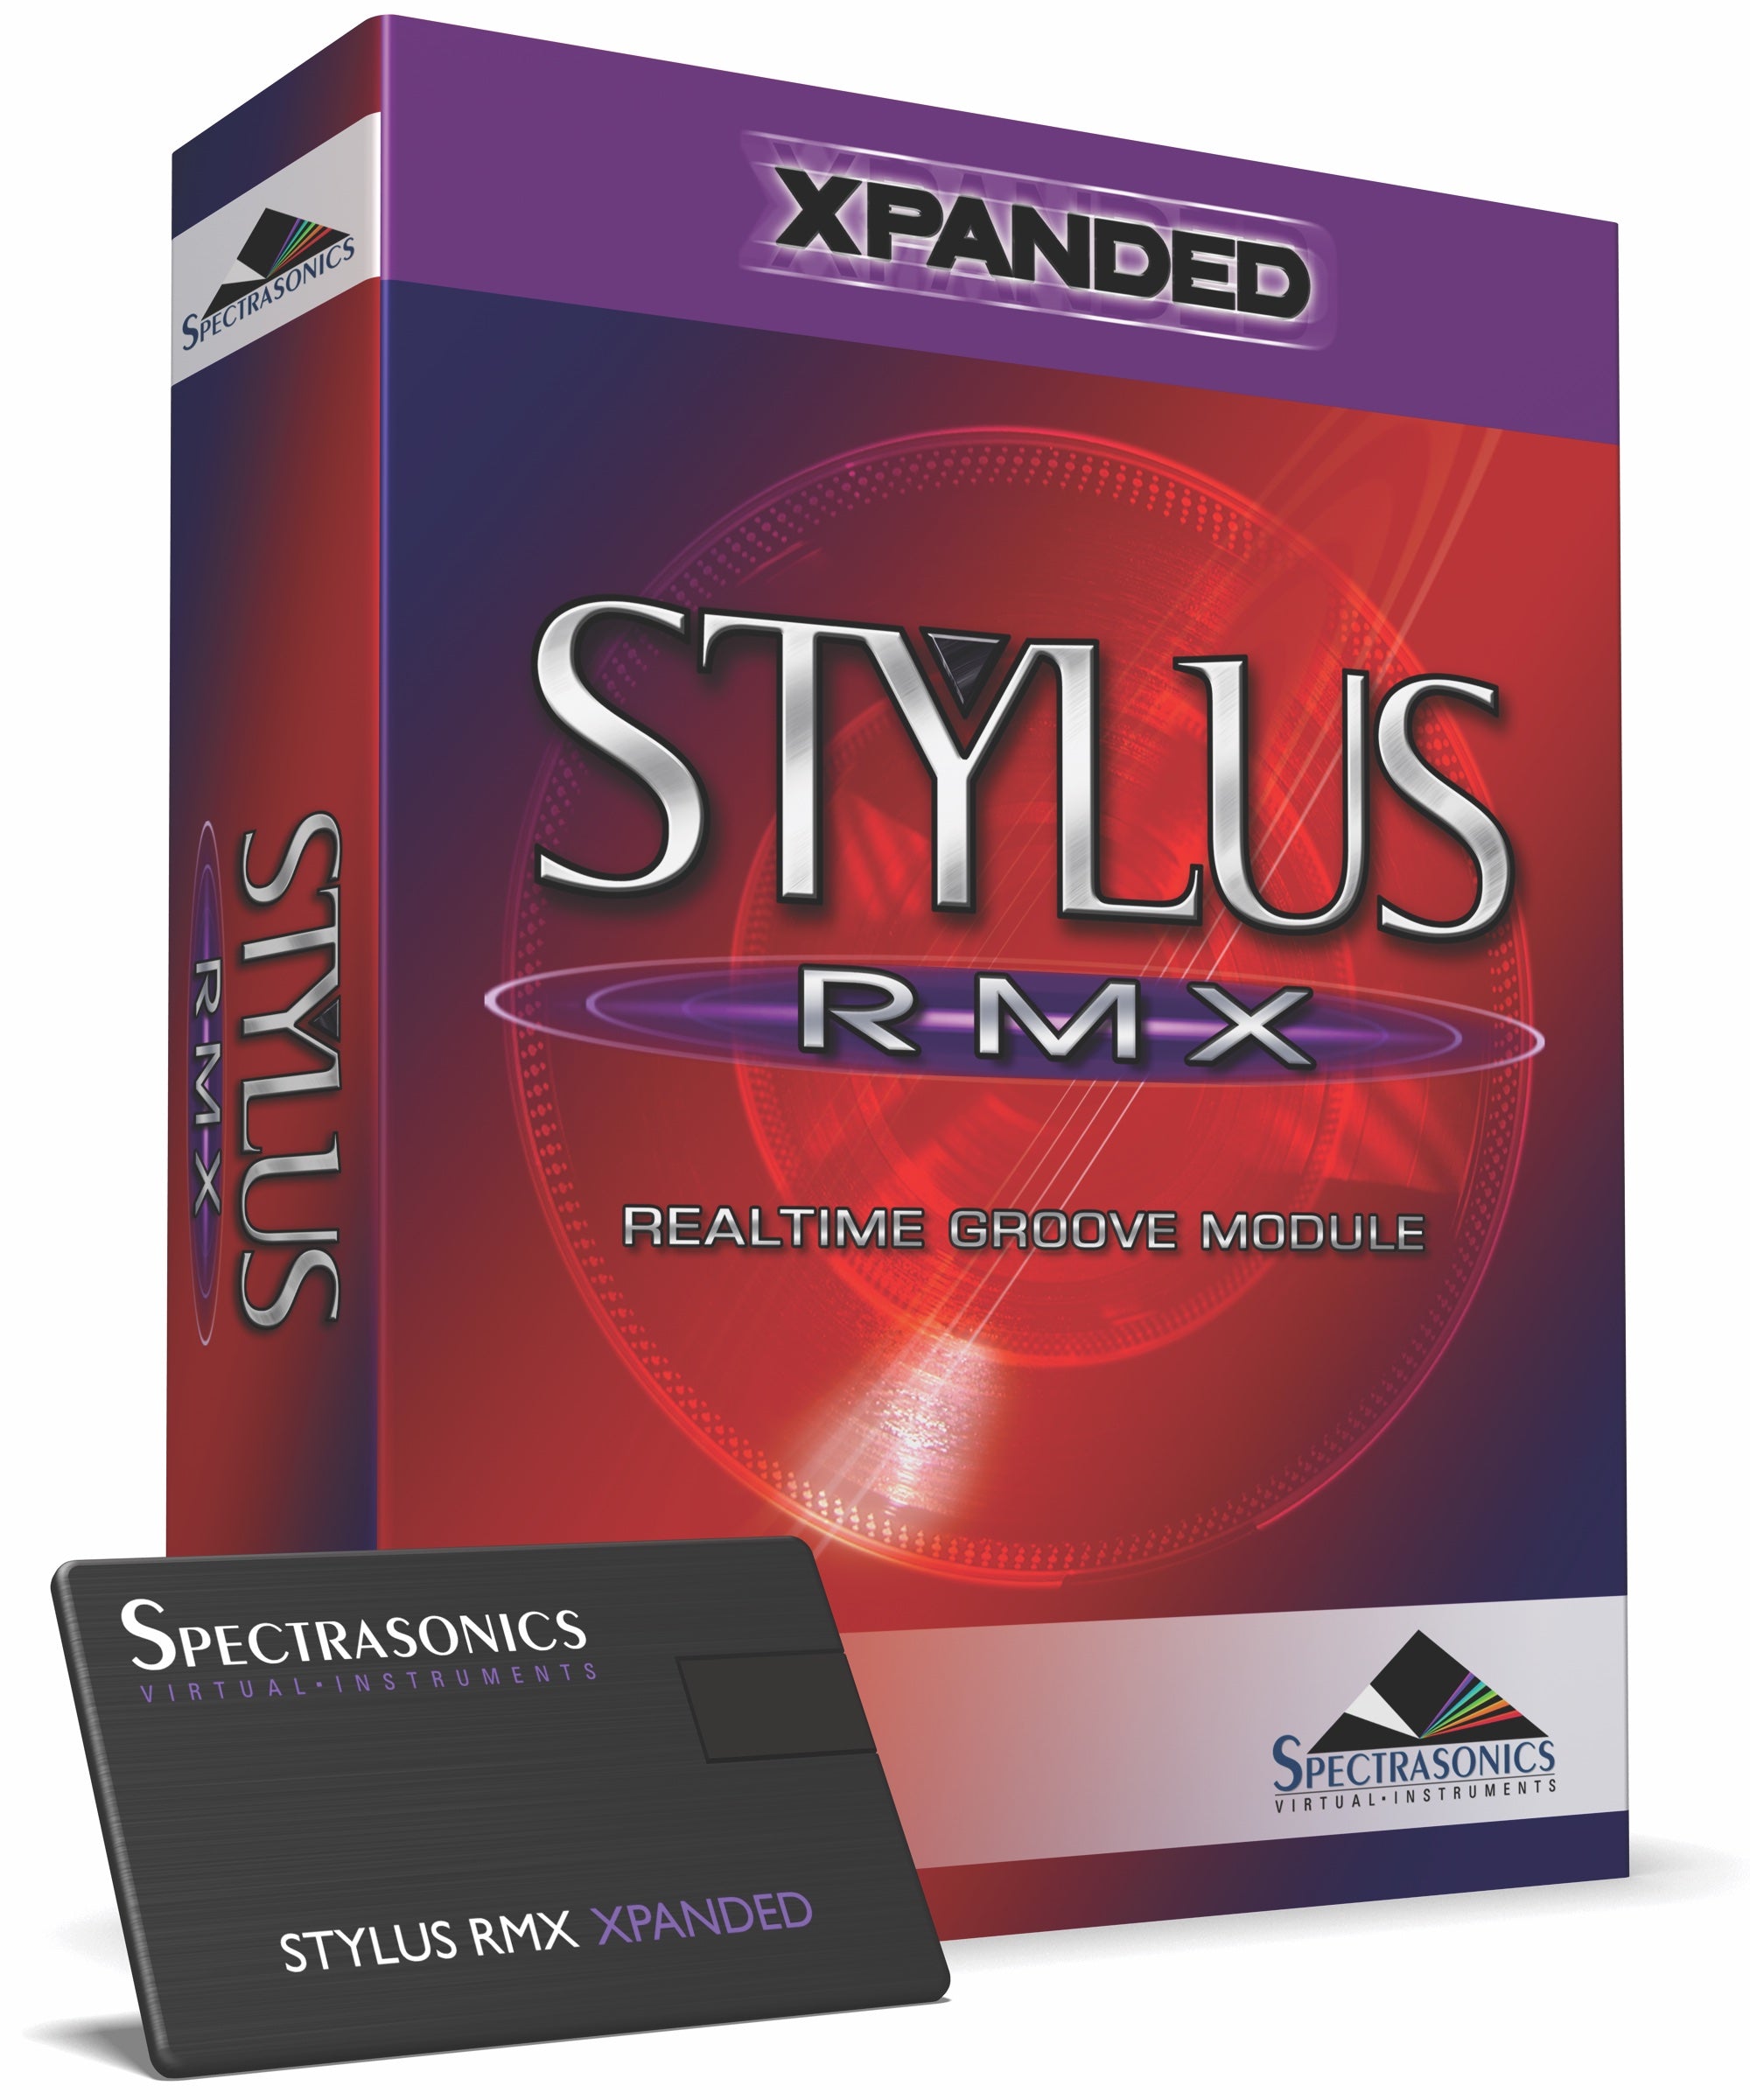 New Spectrasonics Stylus RMX Xpanded (Includes all 4 SAGE Xpanders) Groove Module VST AU AAX MAC/PC (Boxed)